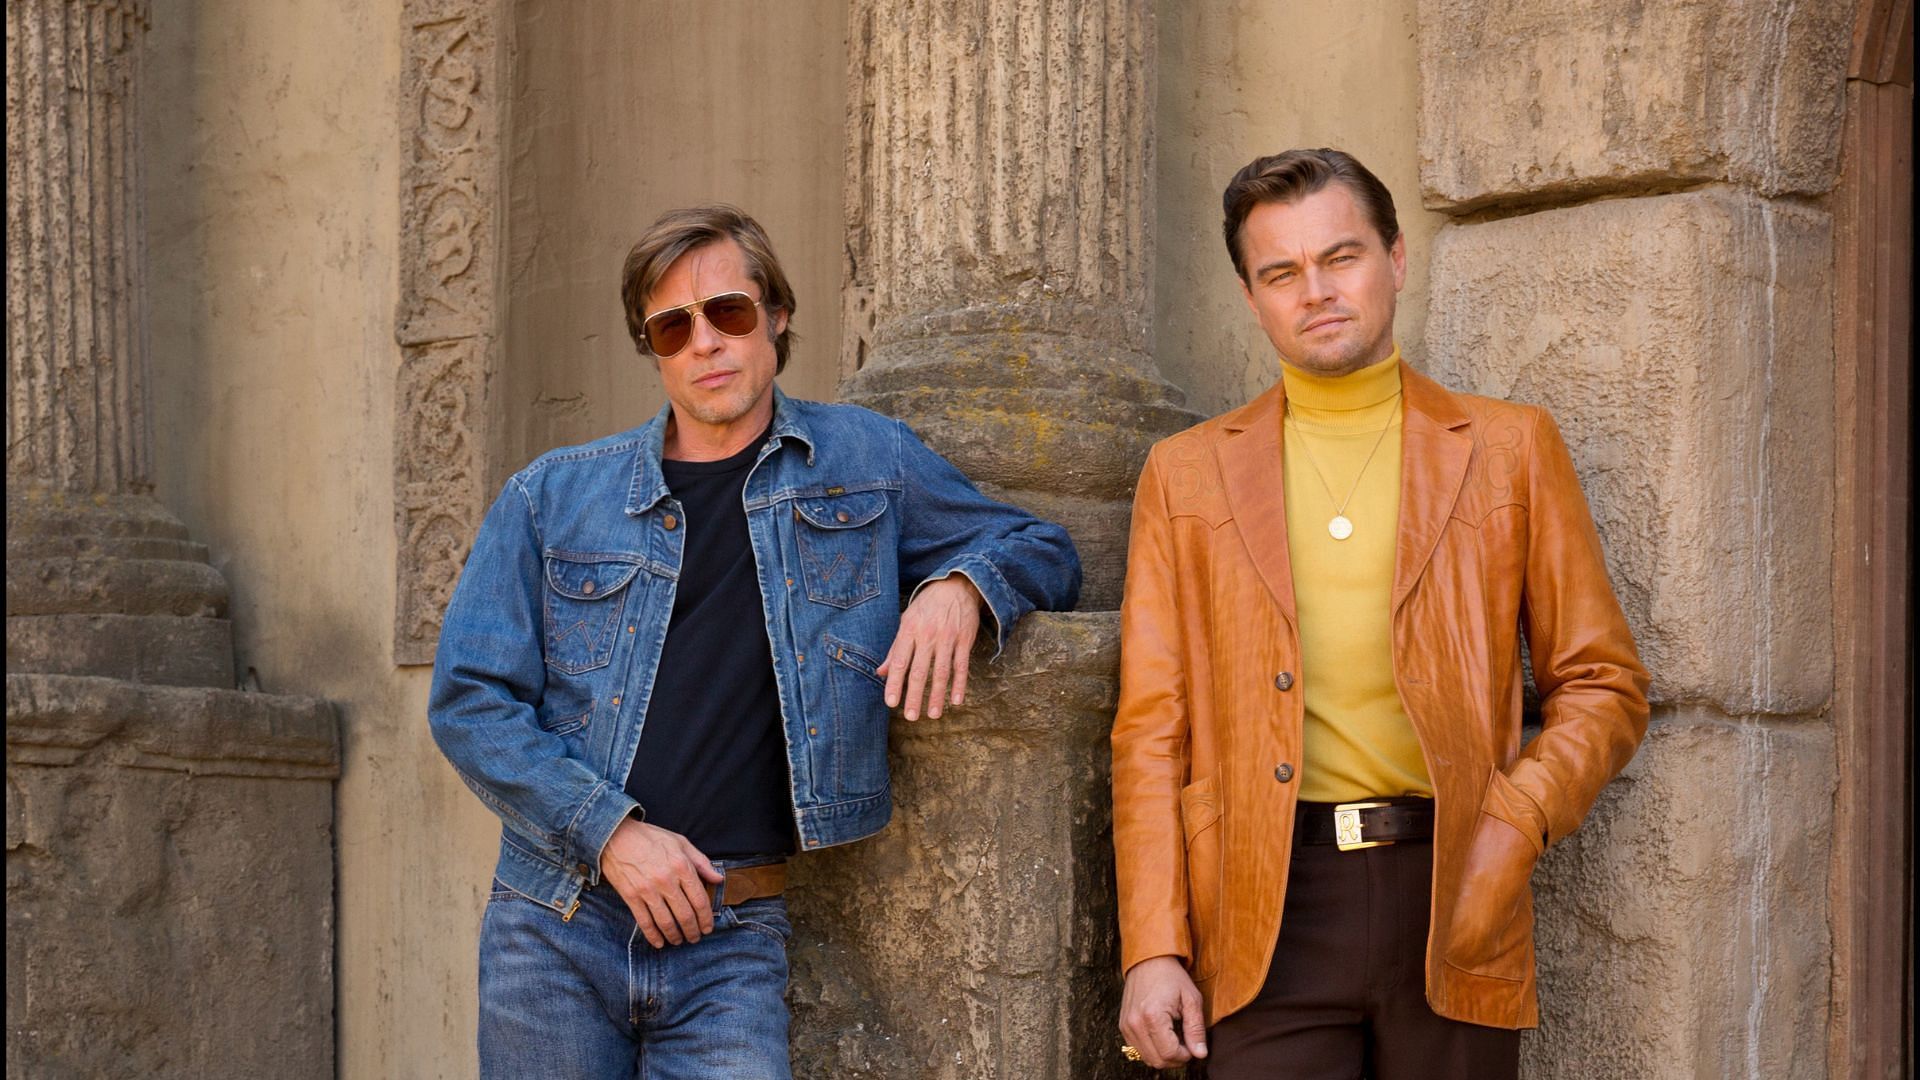 Brad Pitt &amp; Leonardo DiCaprio in &#039;Once Upon a Time... in Hollywood&#039; (Image via Sony)